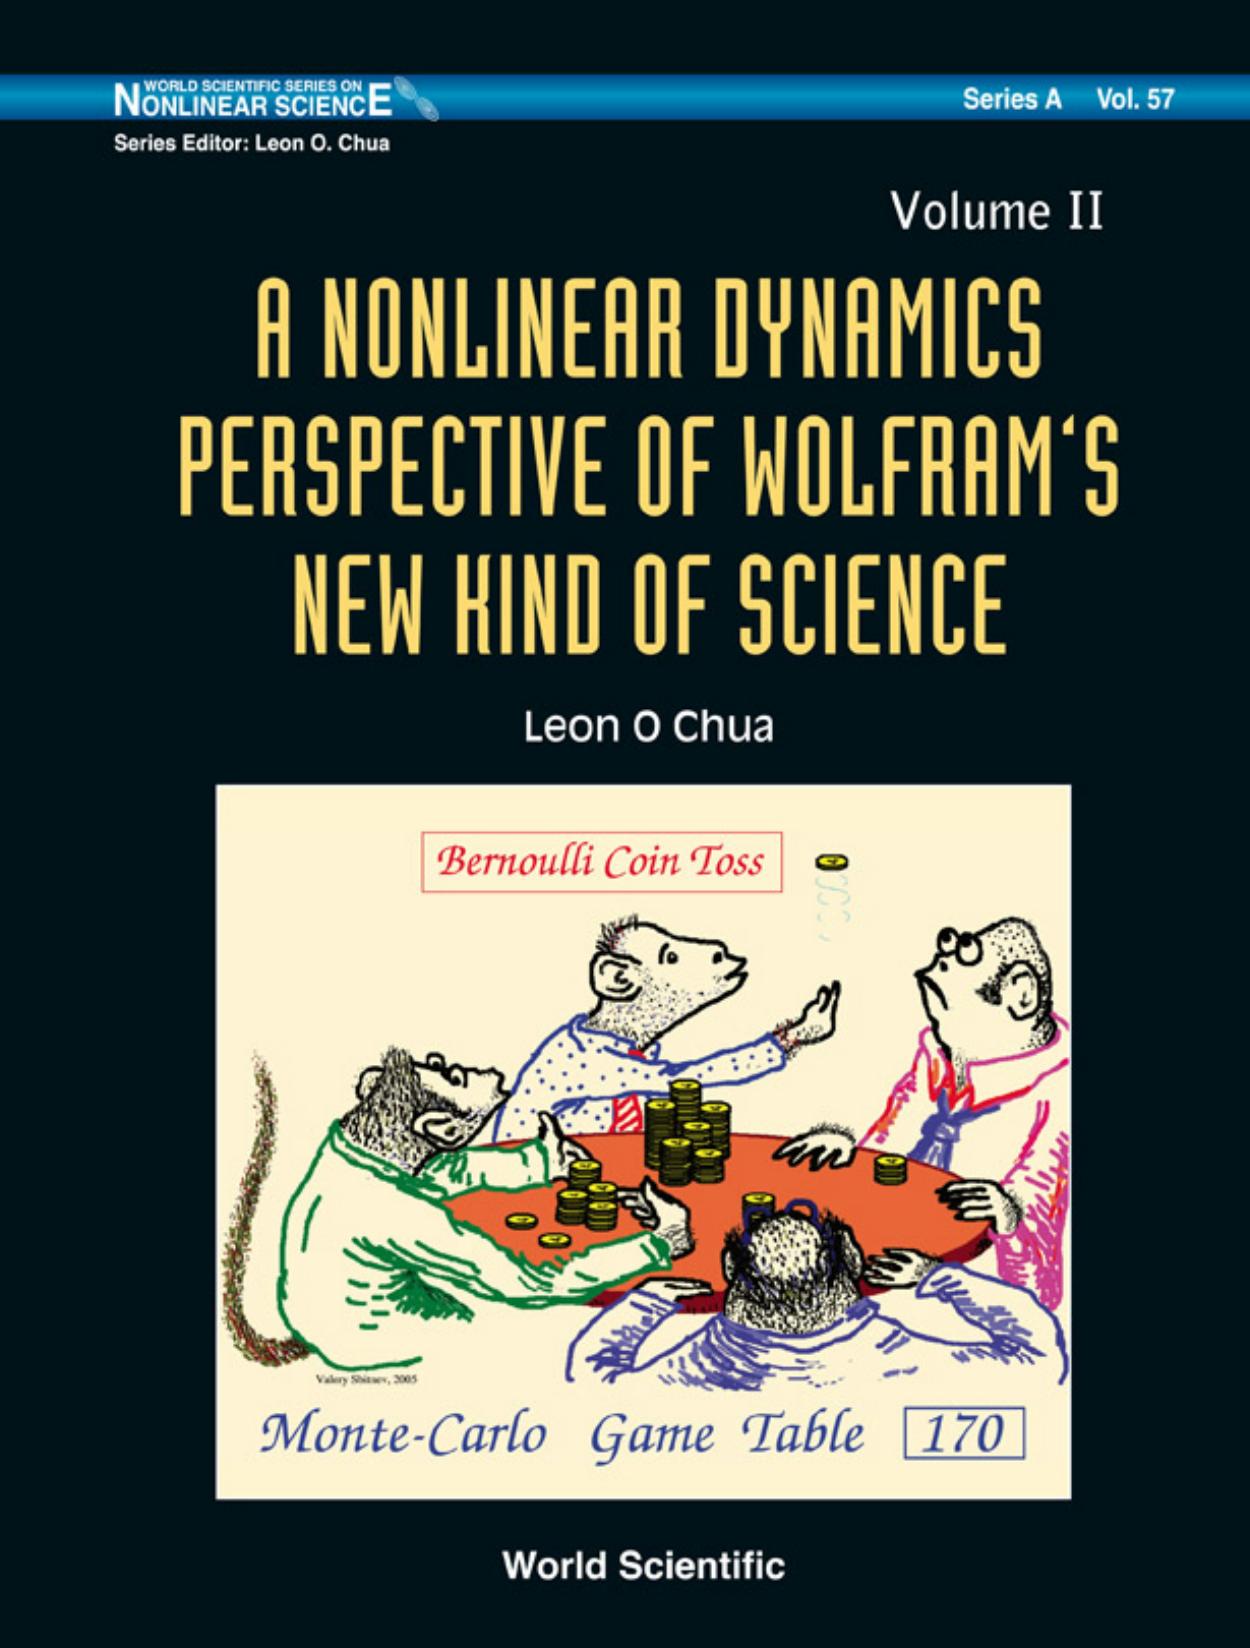 A Nonlinear Dynamics Perspective of Wolfram's New Kind of Science - Volume 2